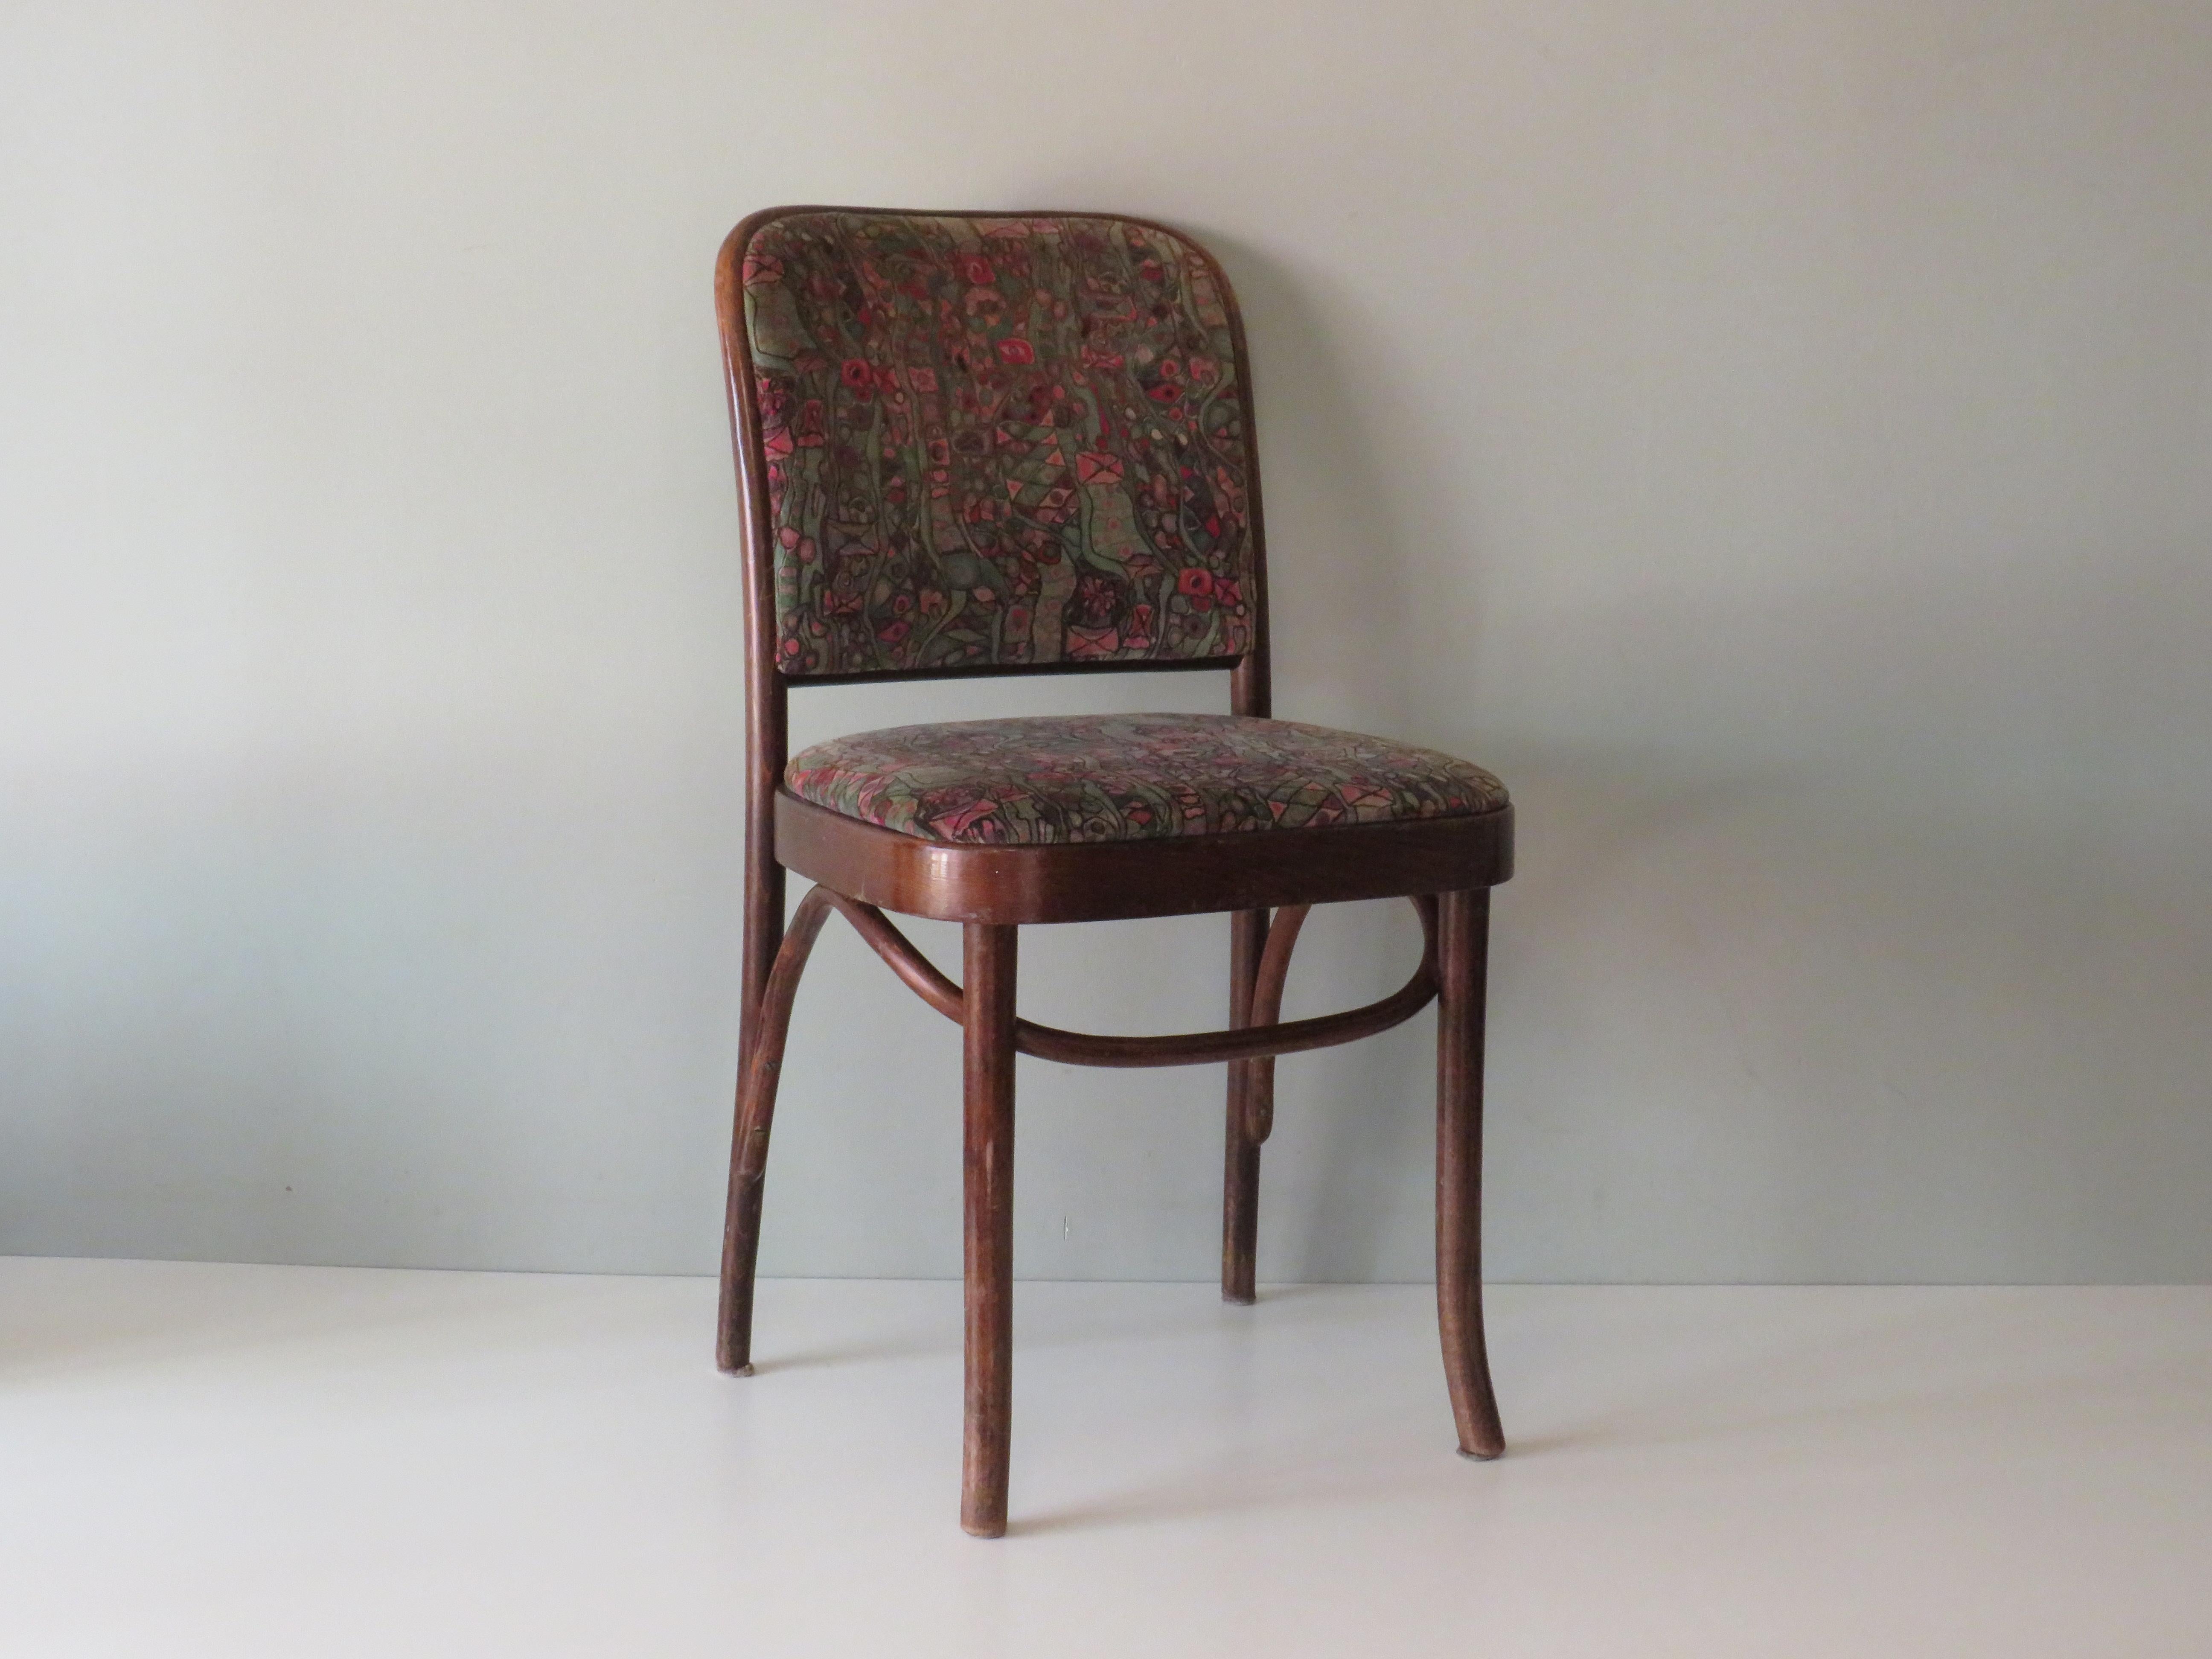 4 Thonet Chairs, Model Prague No. 811, First Half of the 20th Century For Sale 2